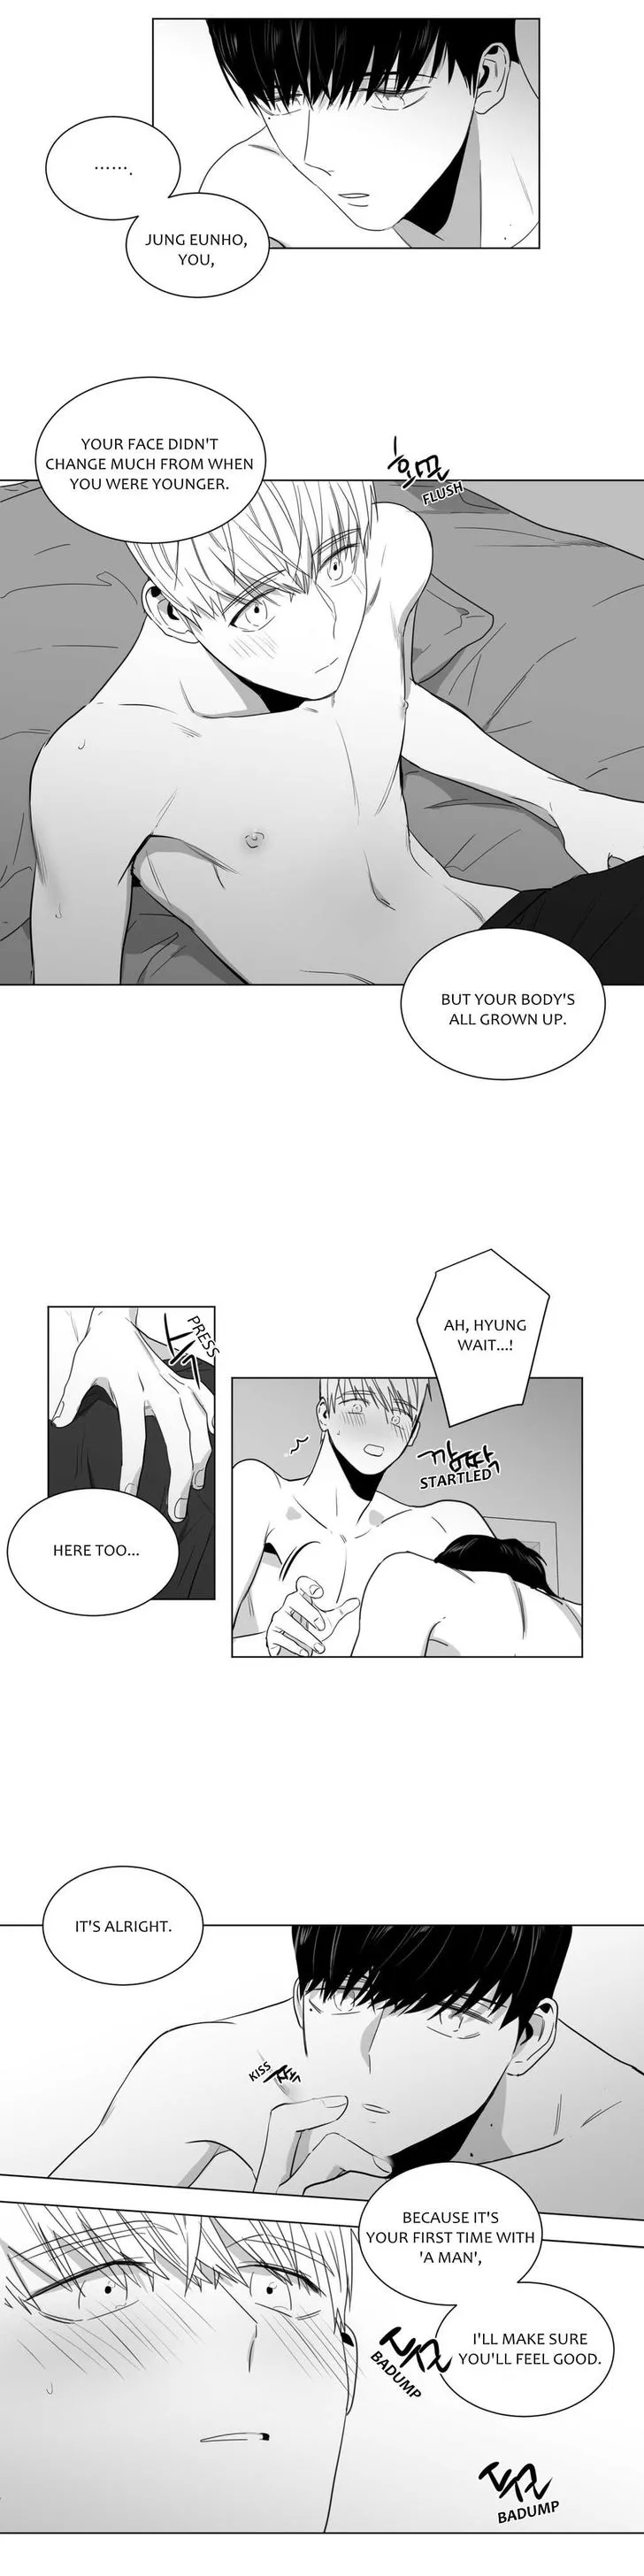 Lover Boy (Lezhin) Chapter 015 page 8